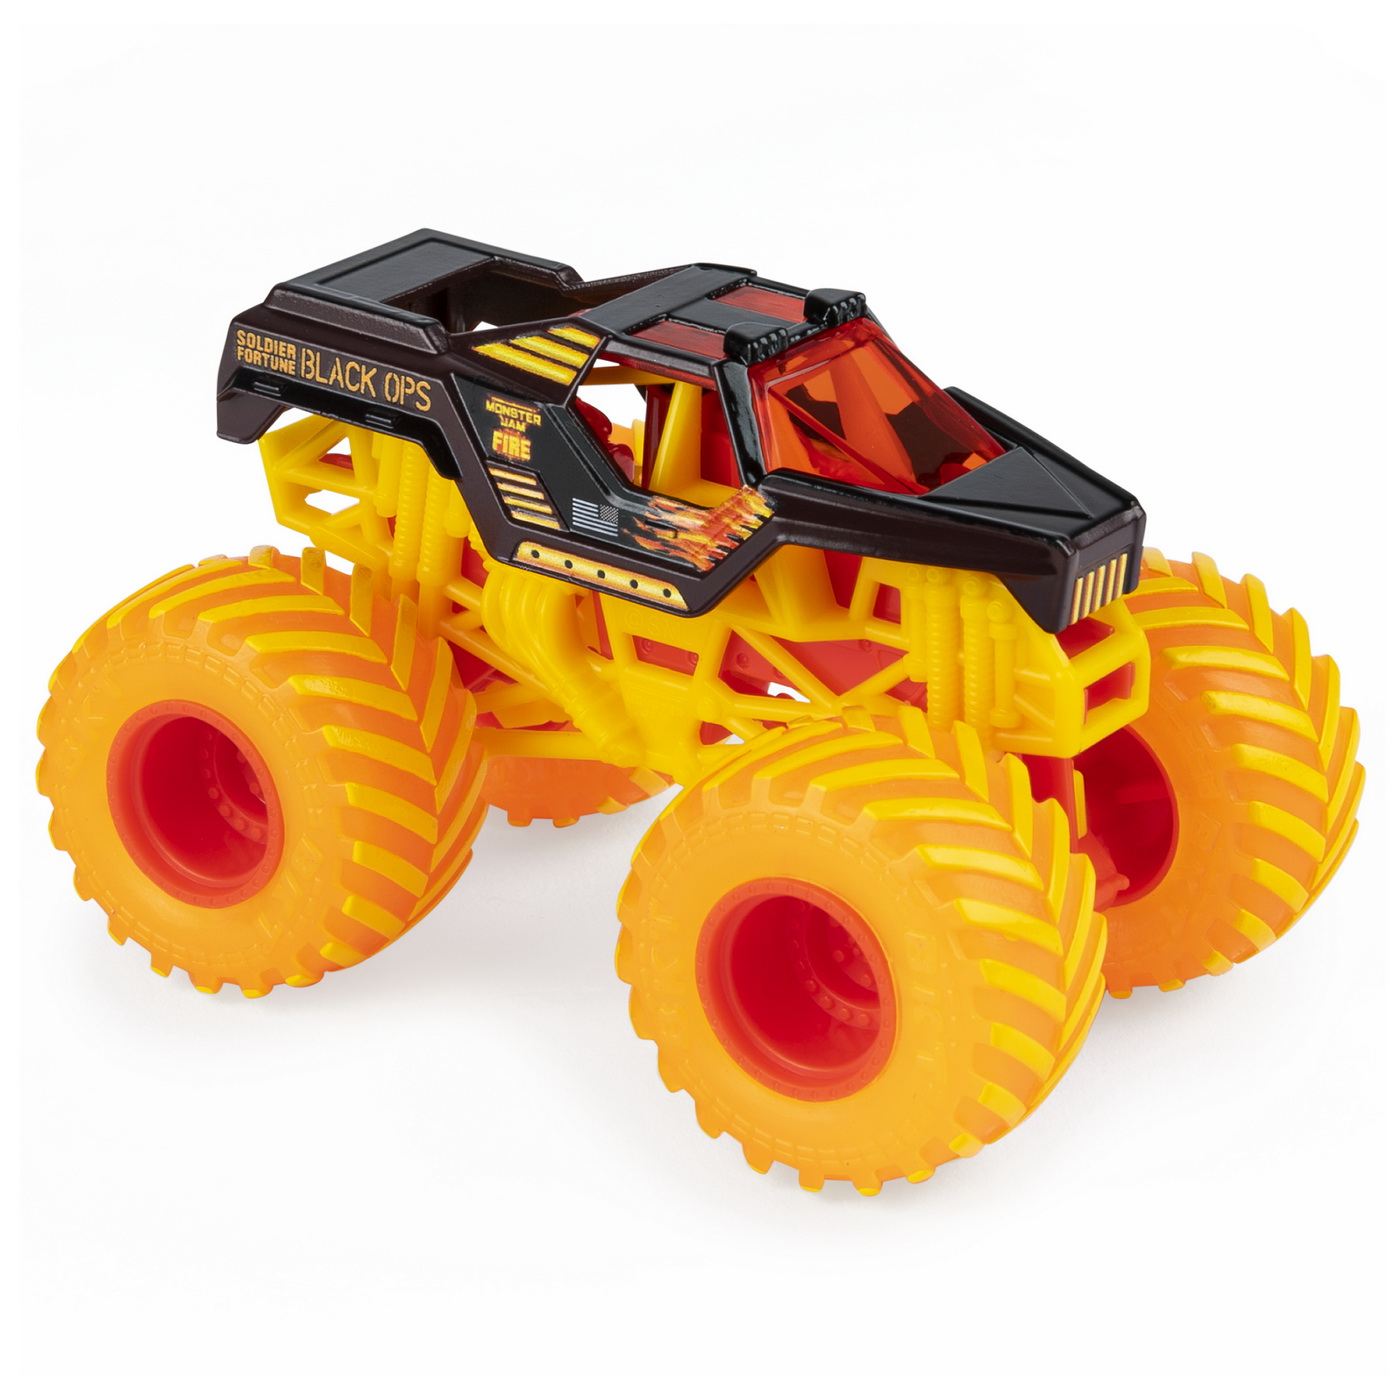 Masinuta Metalica Fire and Ice Soldier Fortune Black OPS | Monster Jam - 3